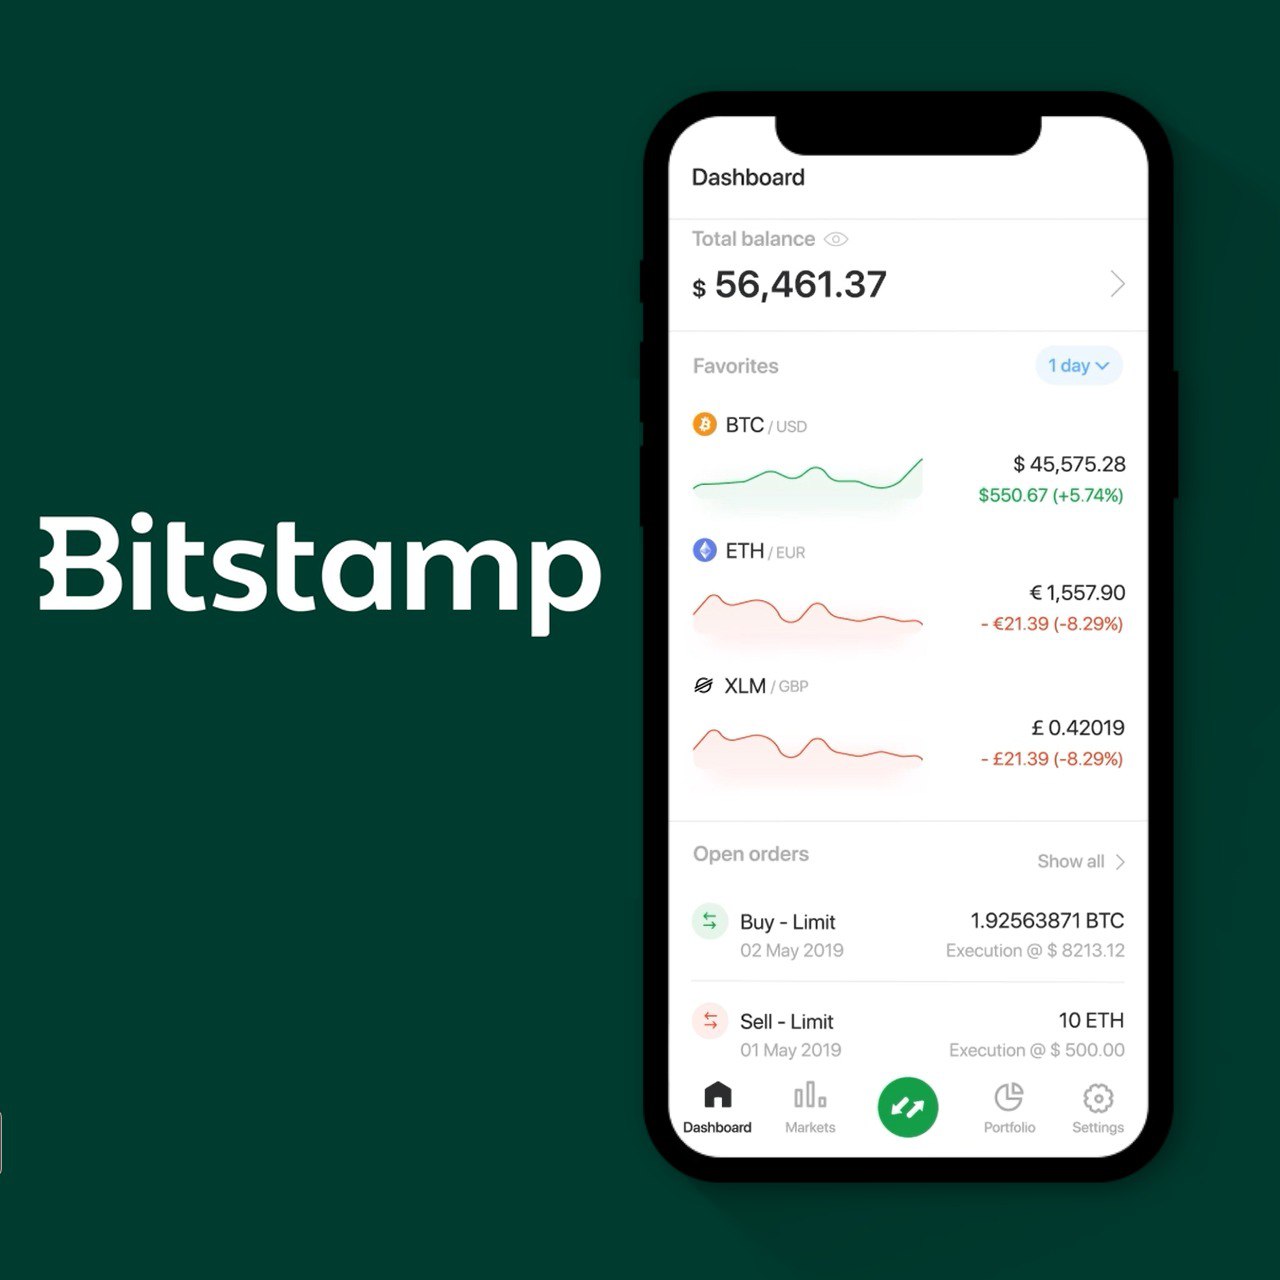 Bitstamp Review | Pricing, Features, Pros and Cons